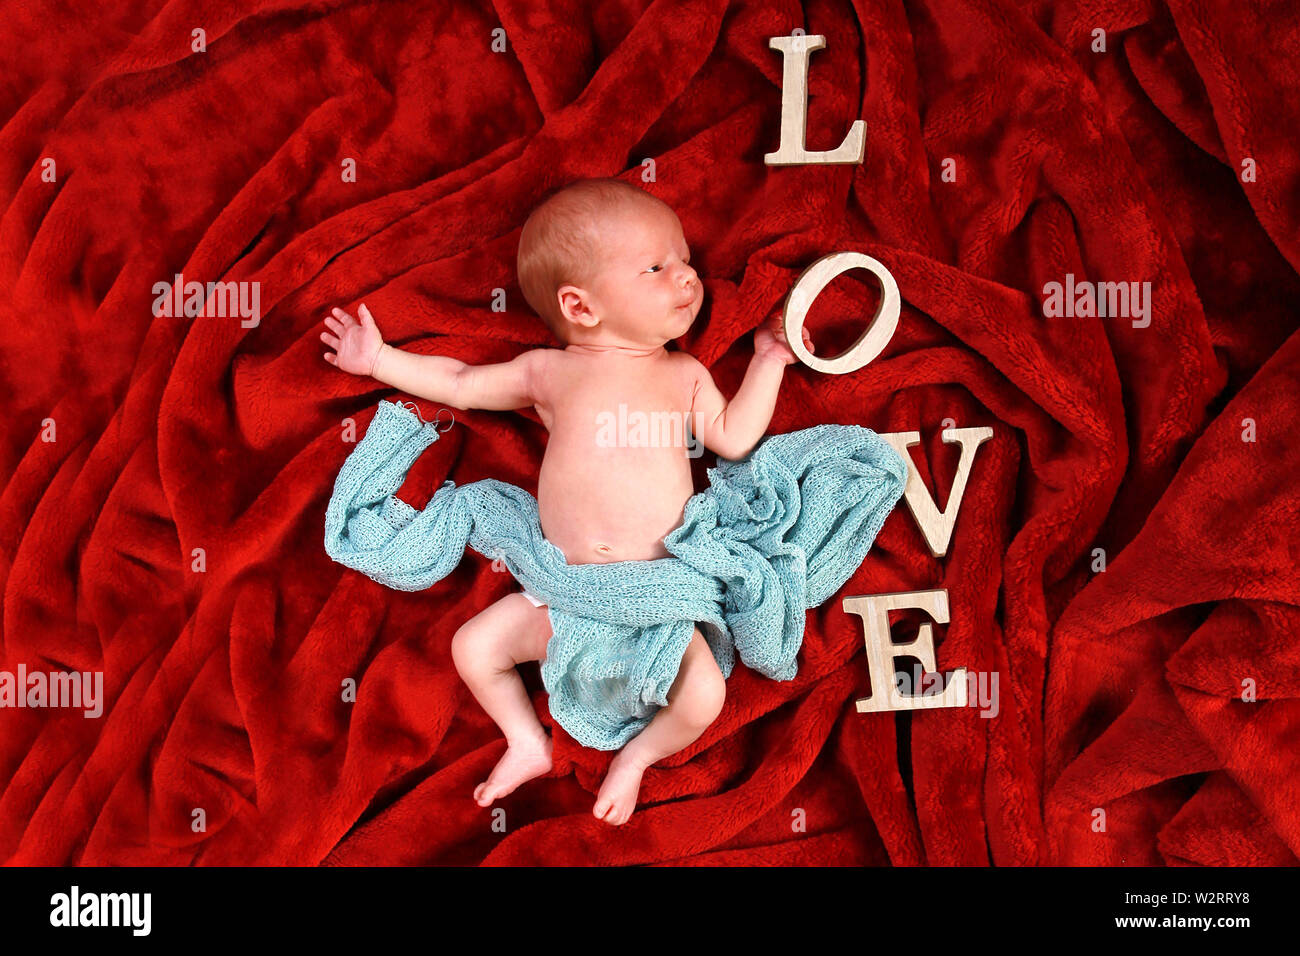 new born baby boy relaxing Stock Photo